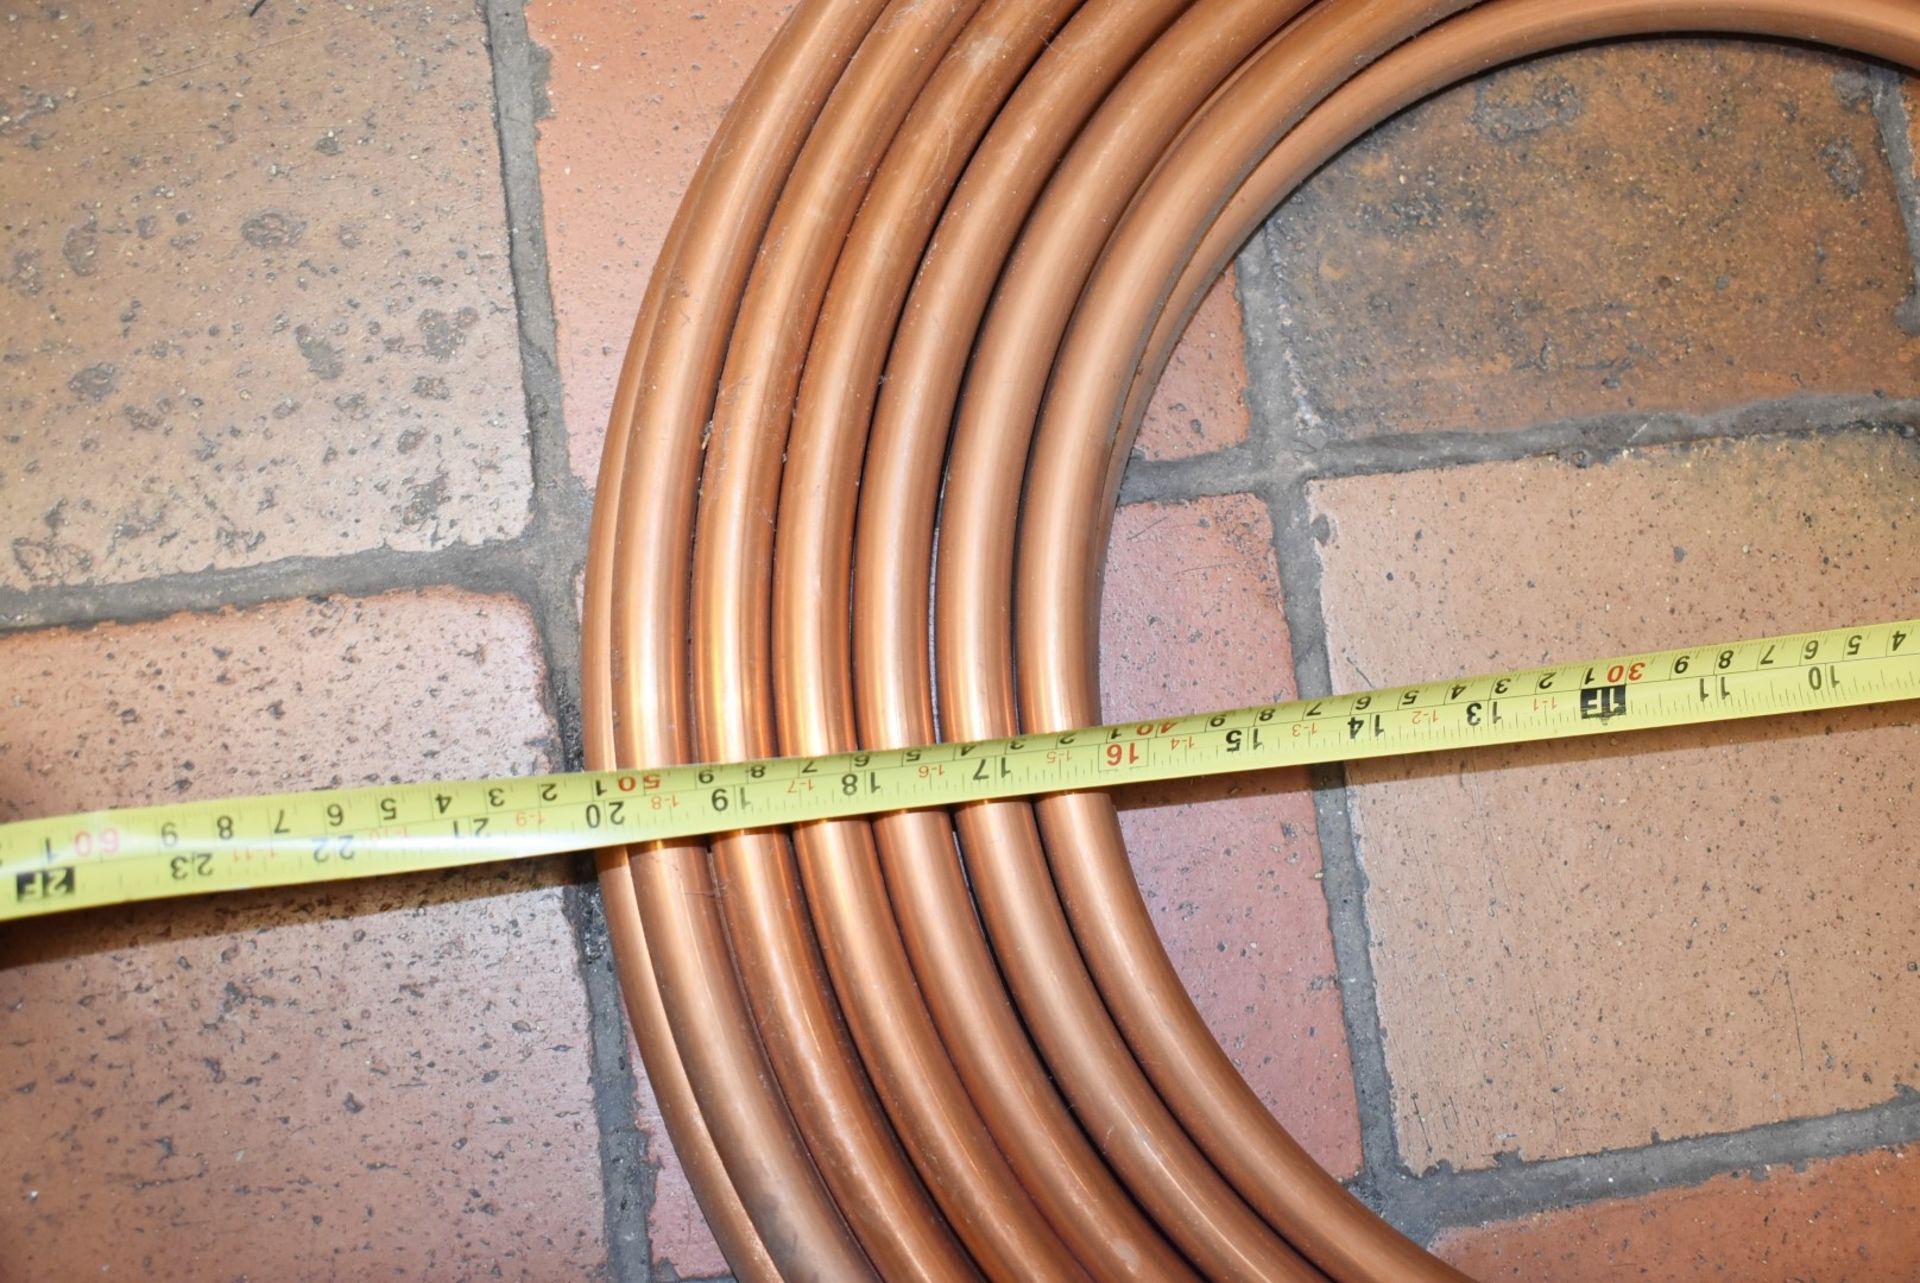 1 x Reel of Unused Copper Tubing - Approx Diameter 20 Inches - Image 3 of 4